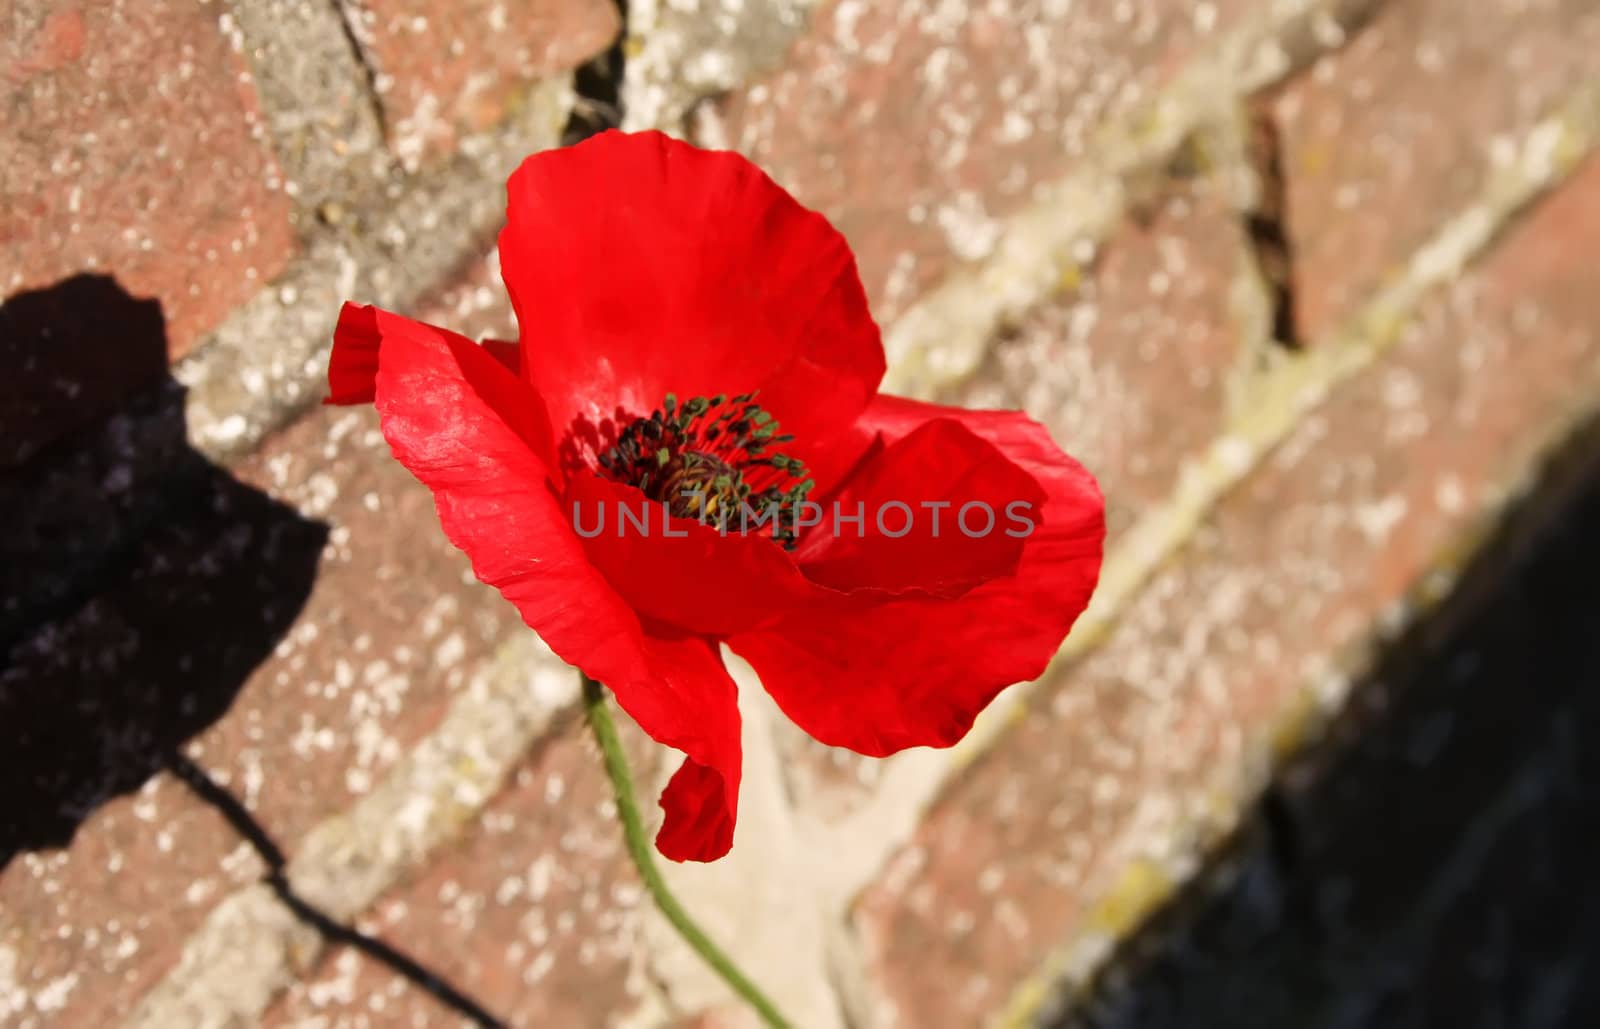 Red poppy flower on brick wall by RawGroup